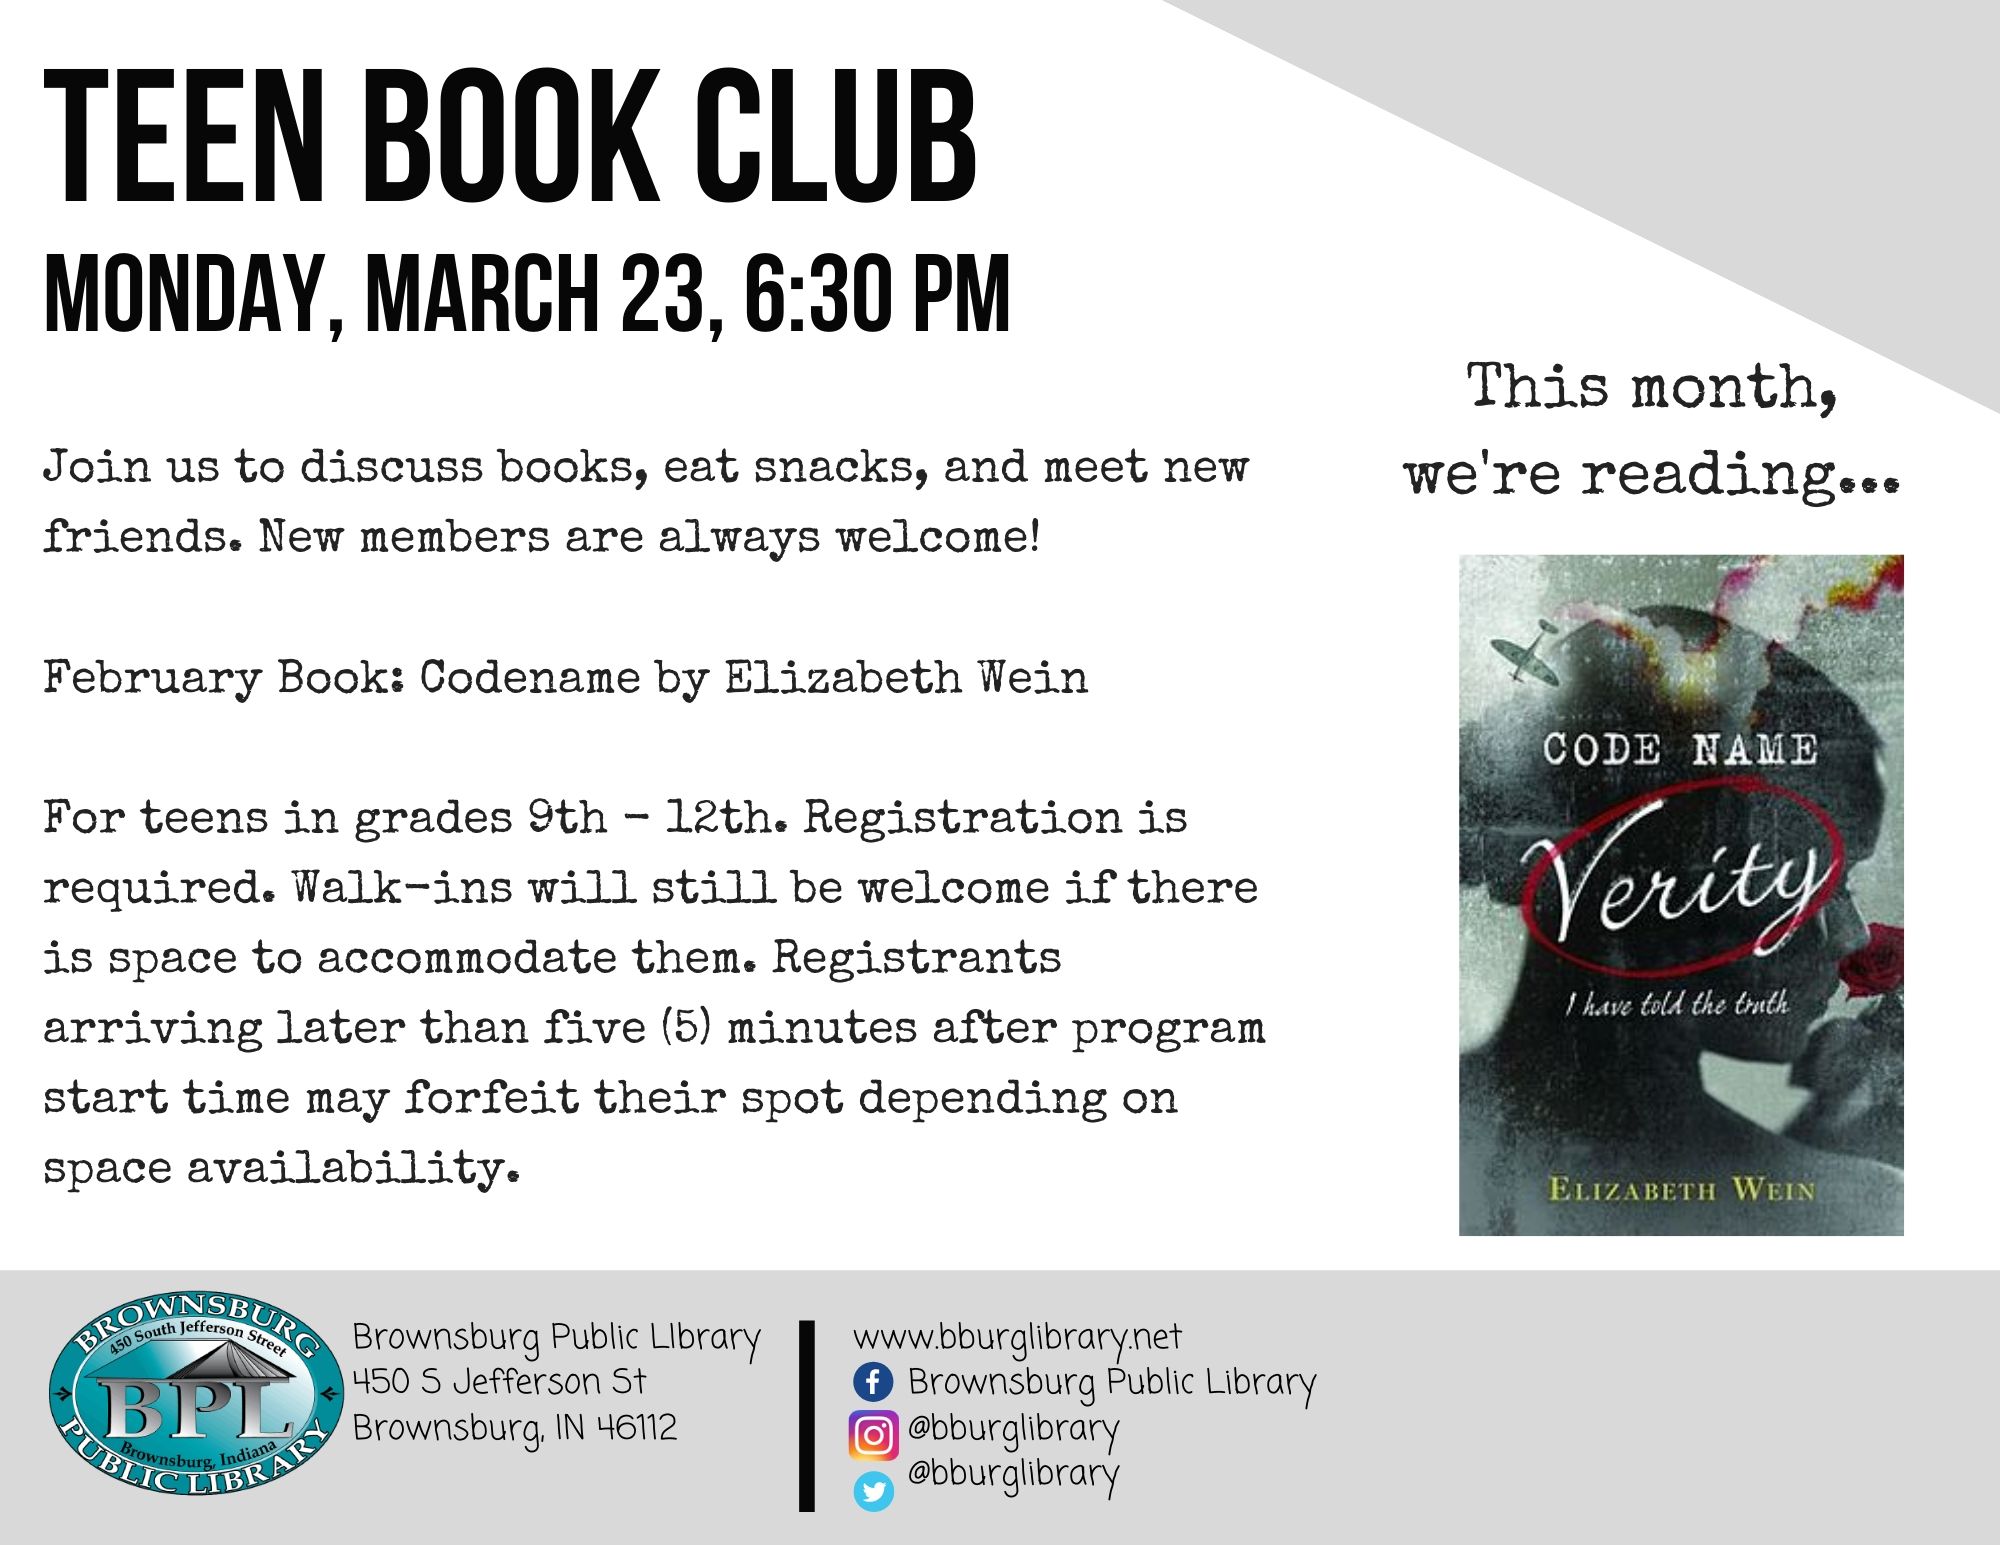 Teen Book Club Monday March 23 at 6:30